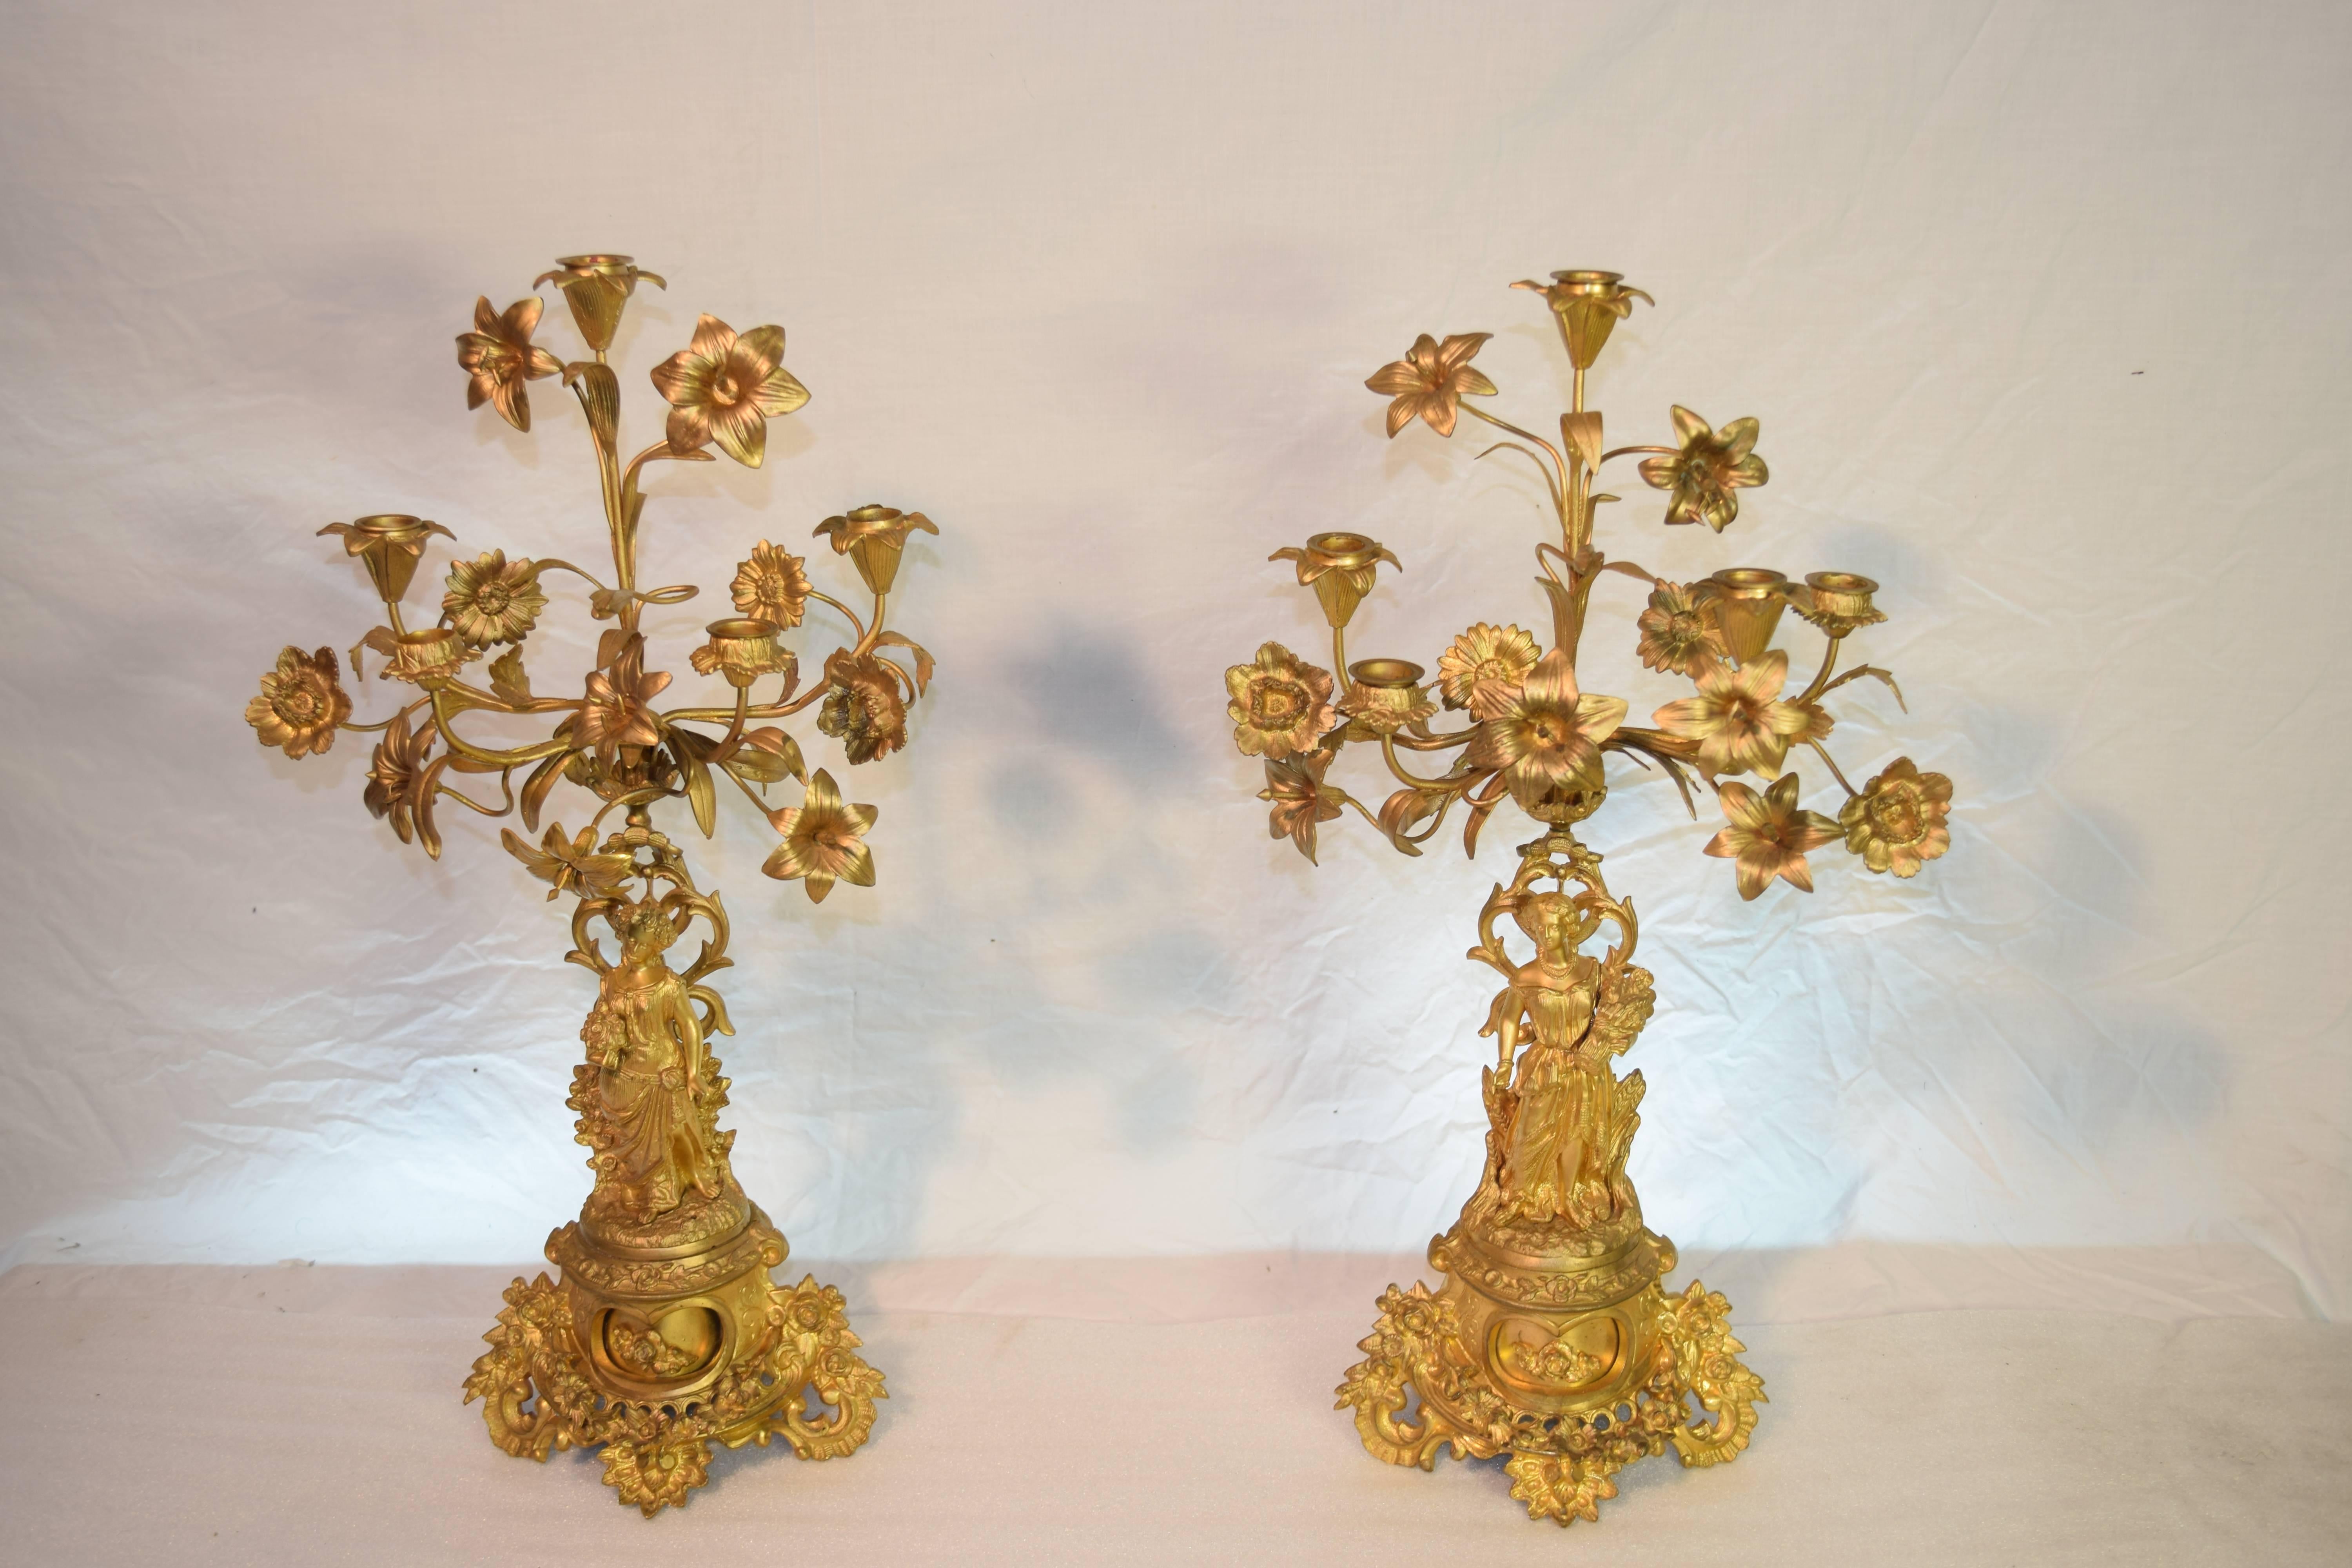 Beautifully decorated French clock set created in the 19th century Romantique st ormolu. Dated 1843.

This is a beautiful antique French clock with two candelabras. It is very typical for the 19th century, or to be more specific, for the